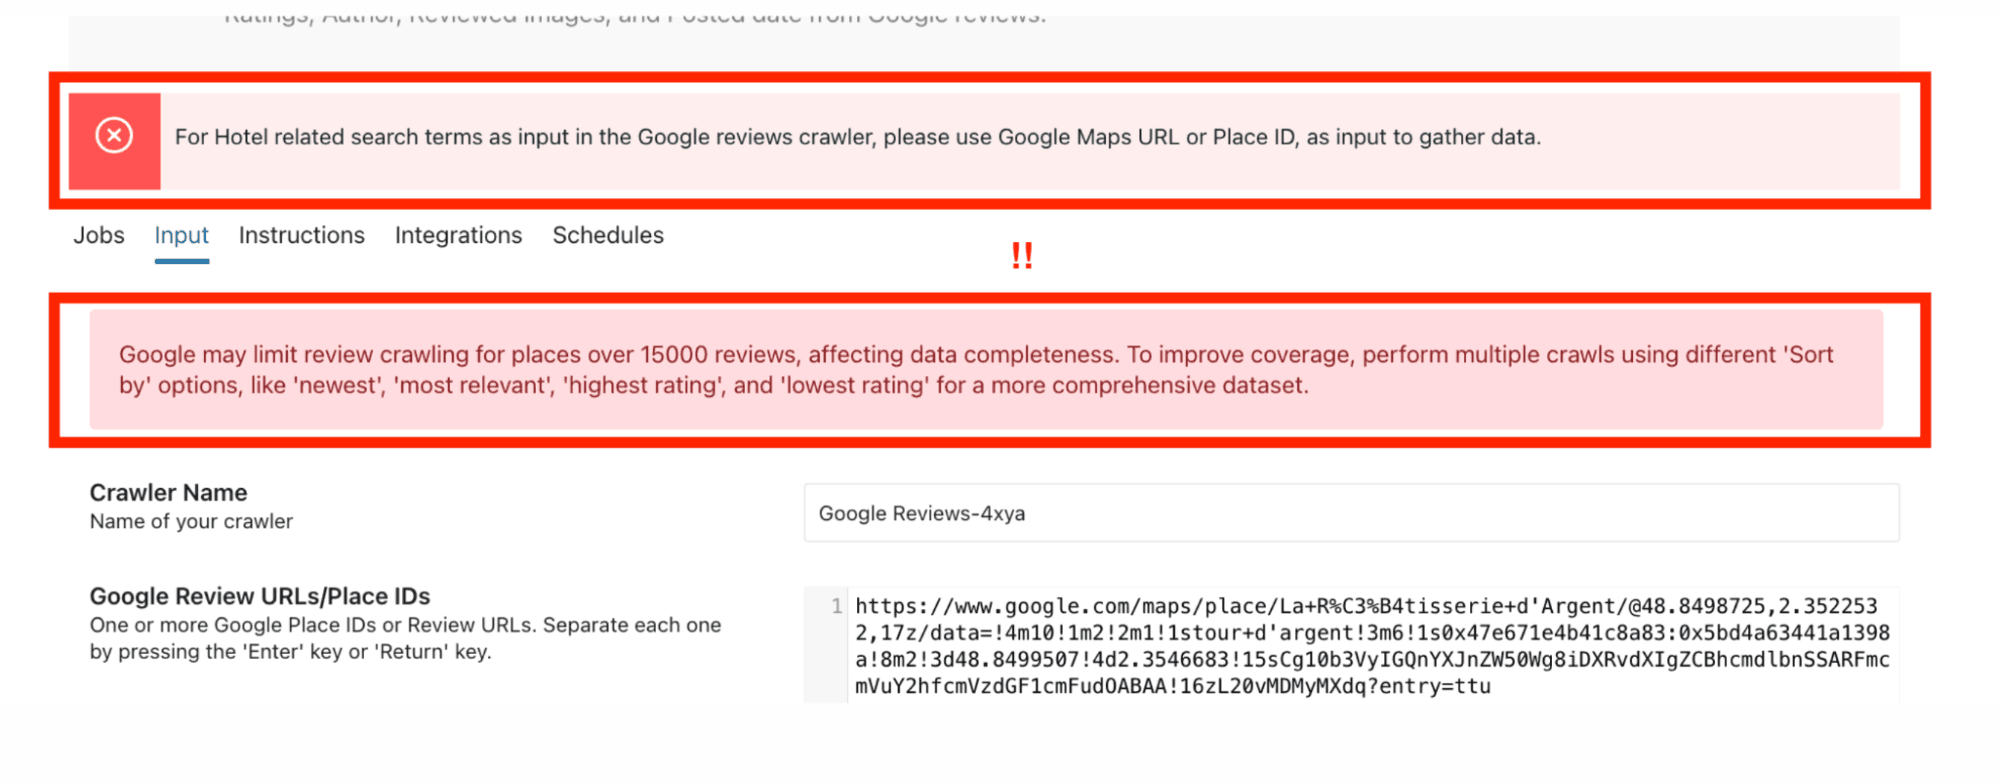 google maps reviews scraper scrapehero warning messages console - image14.png